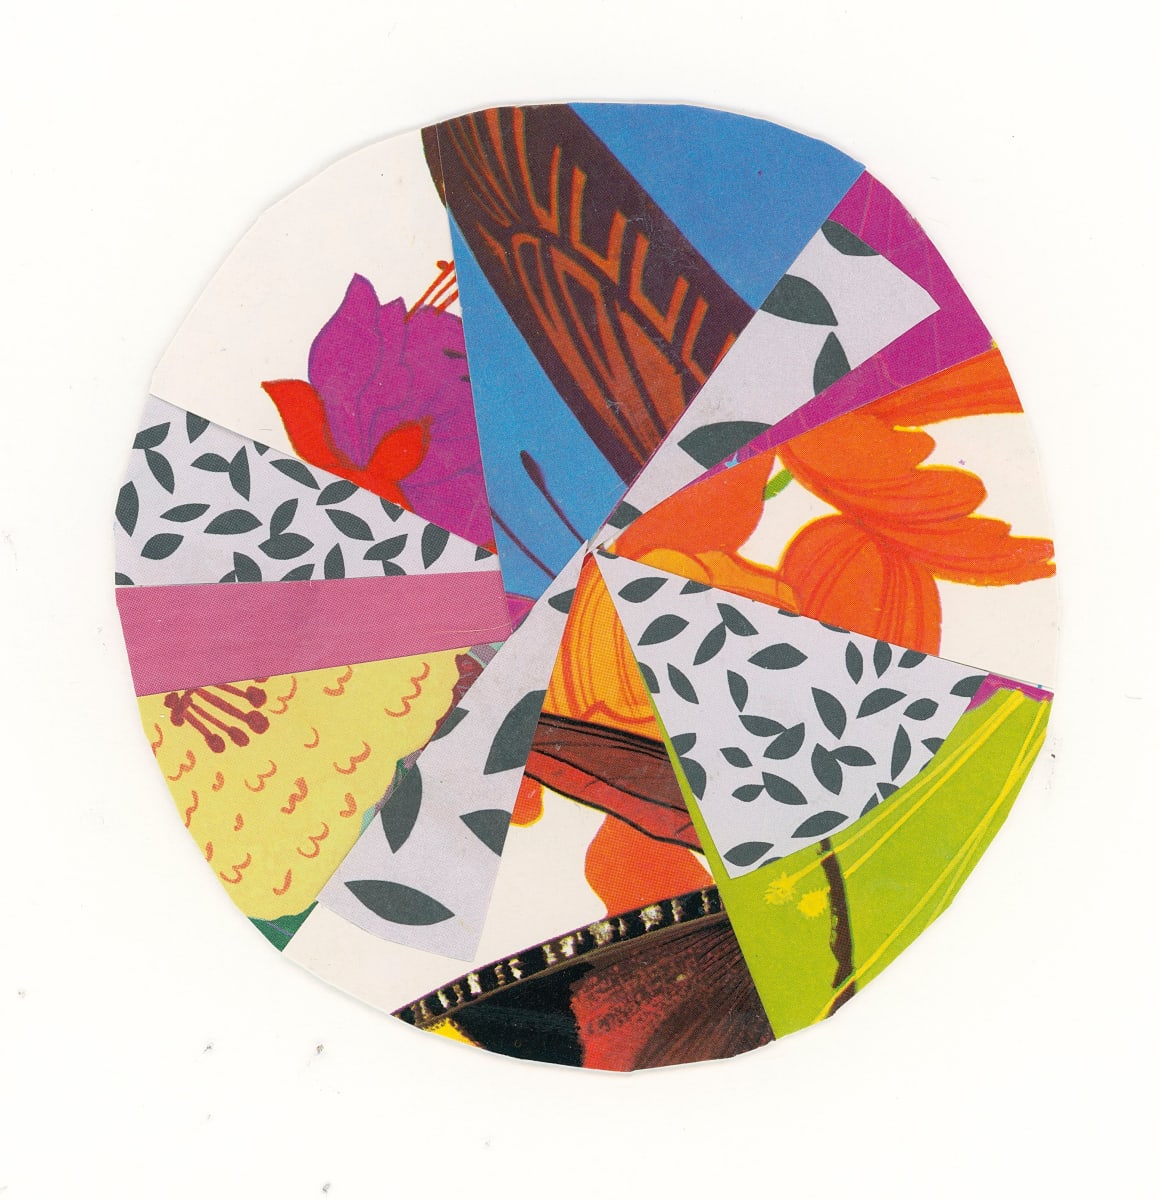 Color Wheel, #2 by Amanda Petrozzini  Image: Hand-cut original mixed media collage, 4x4", on watercolor paper.